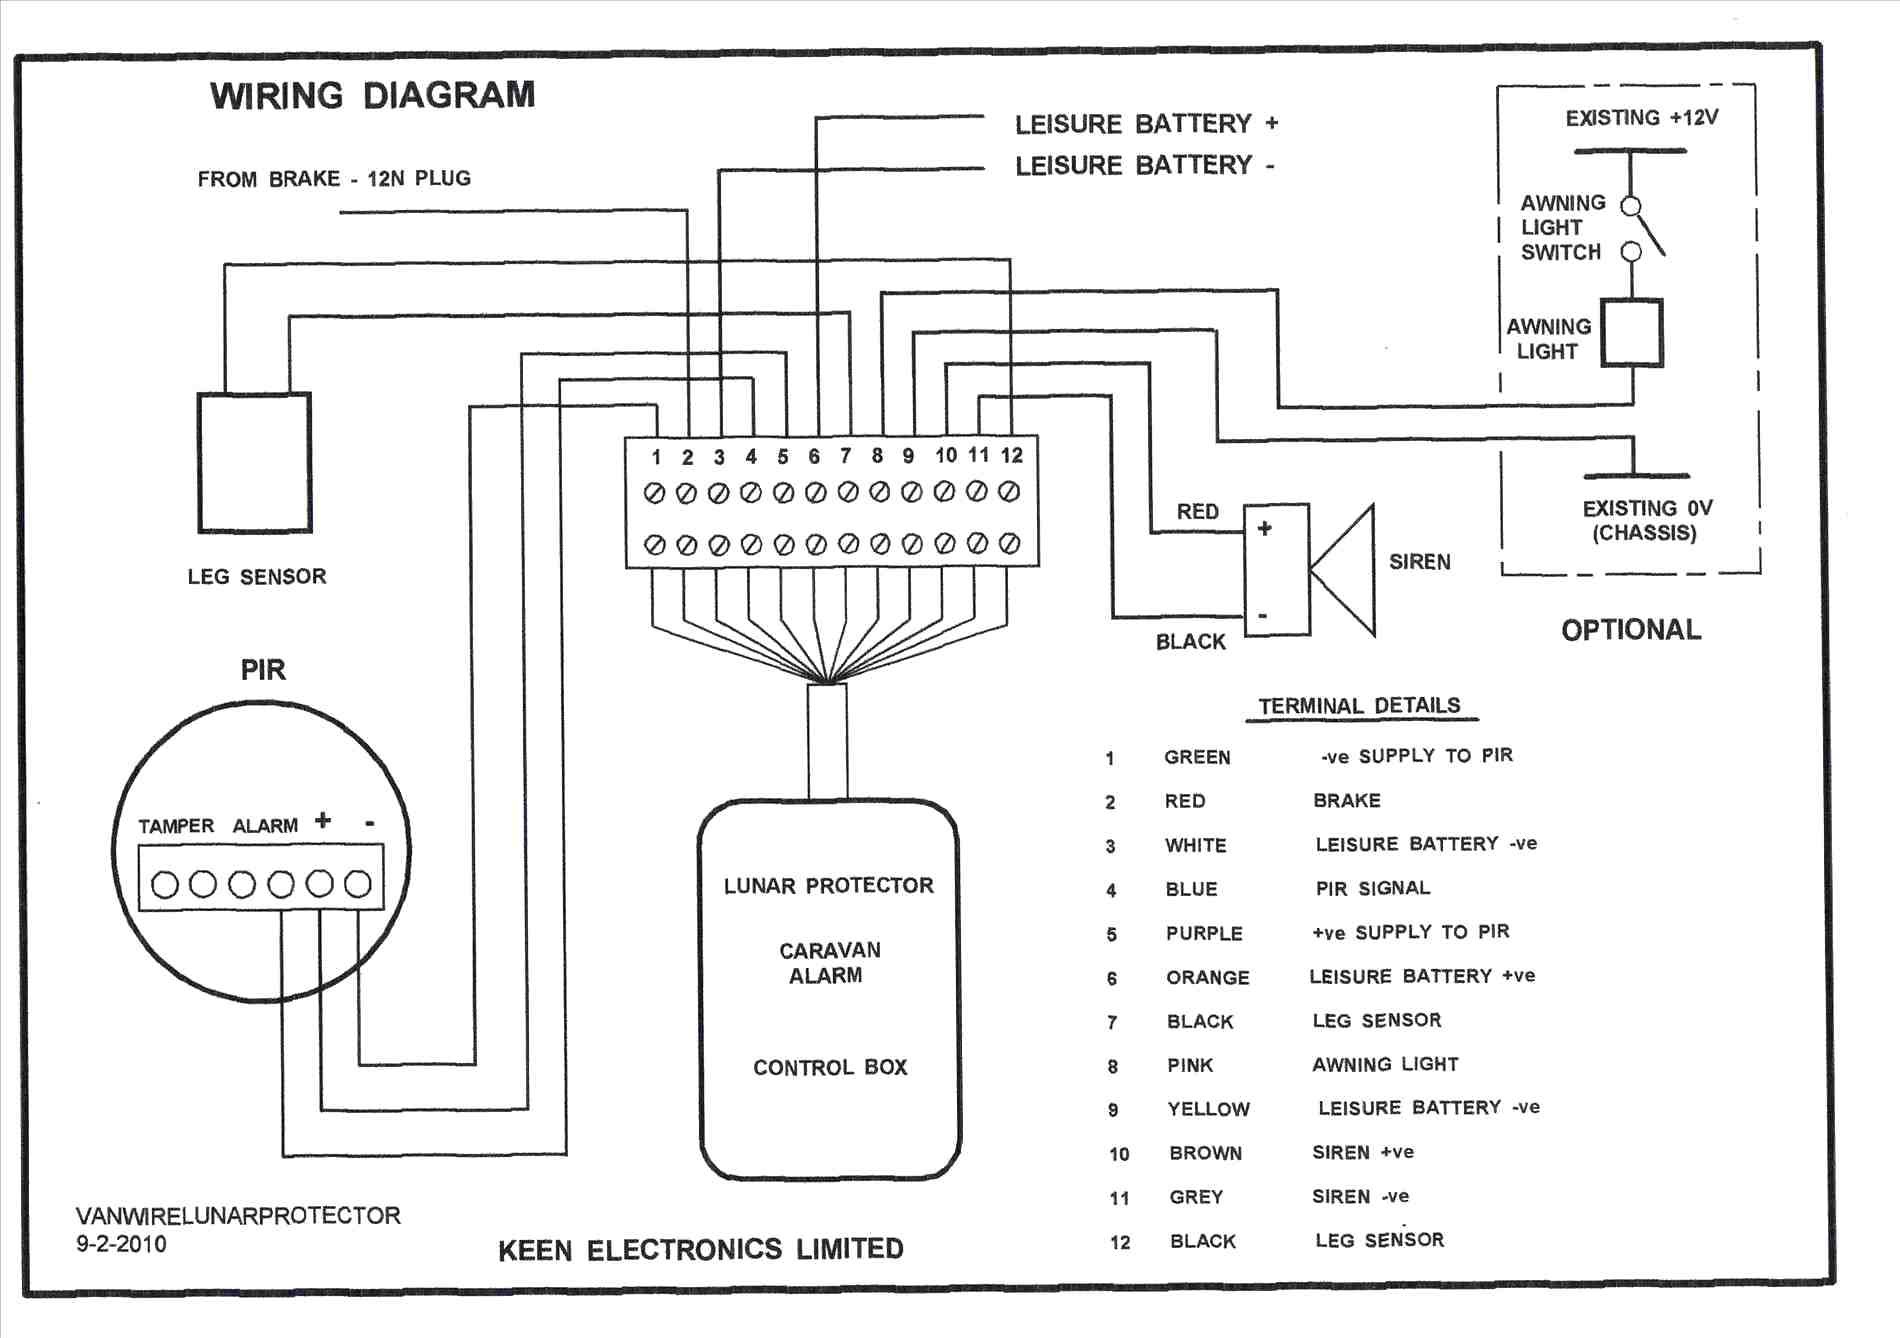 Fire Alarm System Wiring Diagram Wiring Diagram for Duct Smoke Detectors Trusted Wiring Diagram Of Fire Alarm System Wiring Diagram